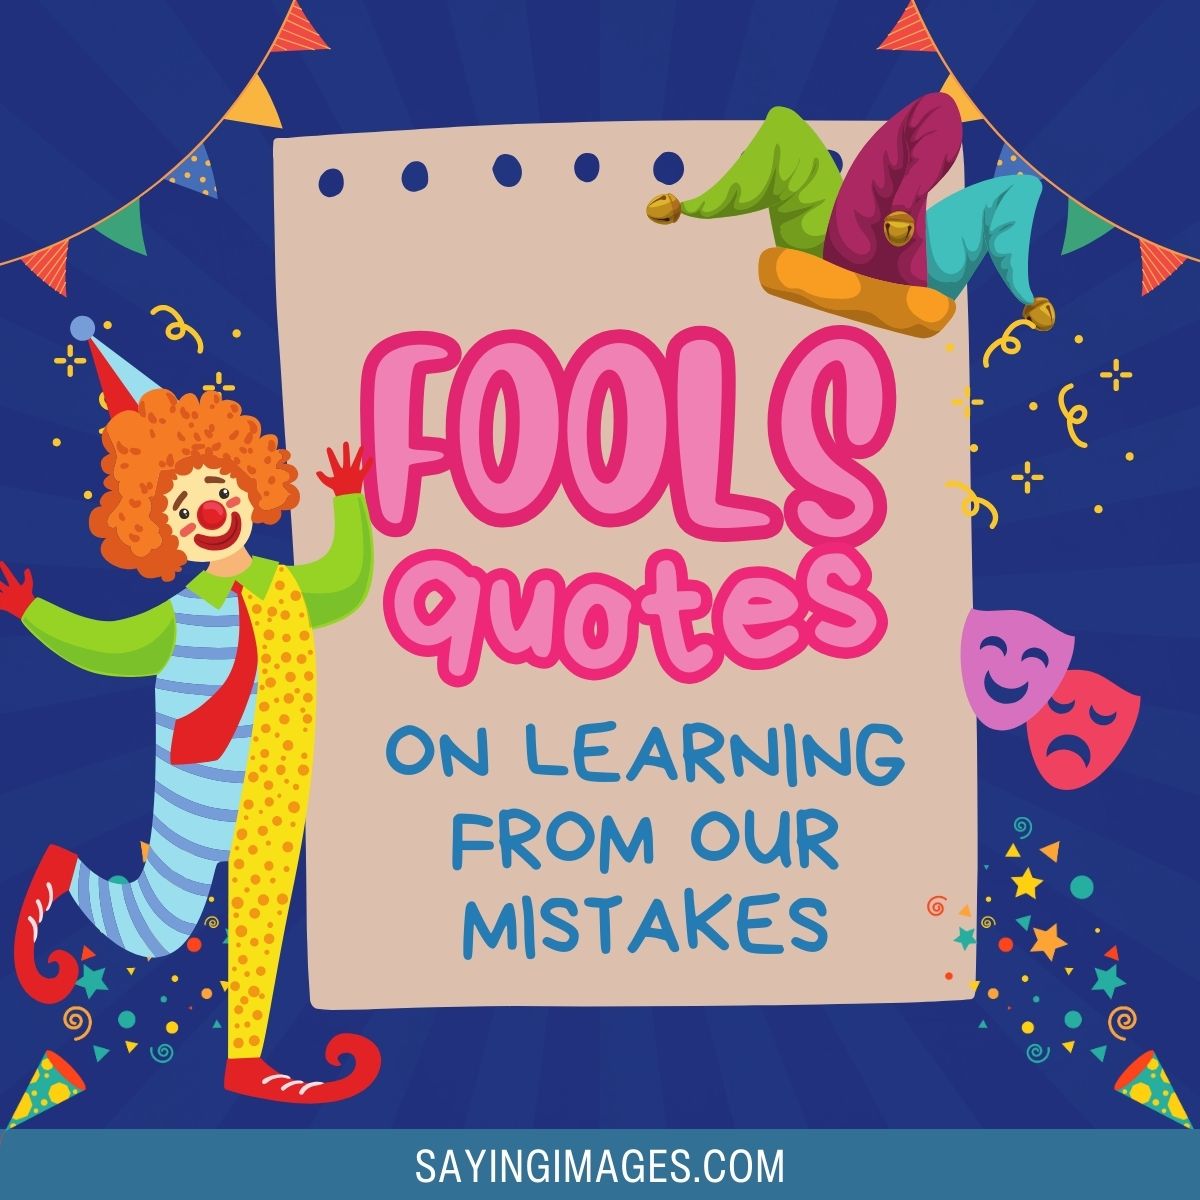 50 Fool Quotes On Learning From Our Mistakes